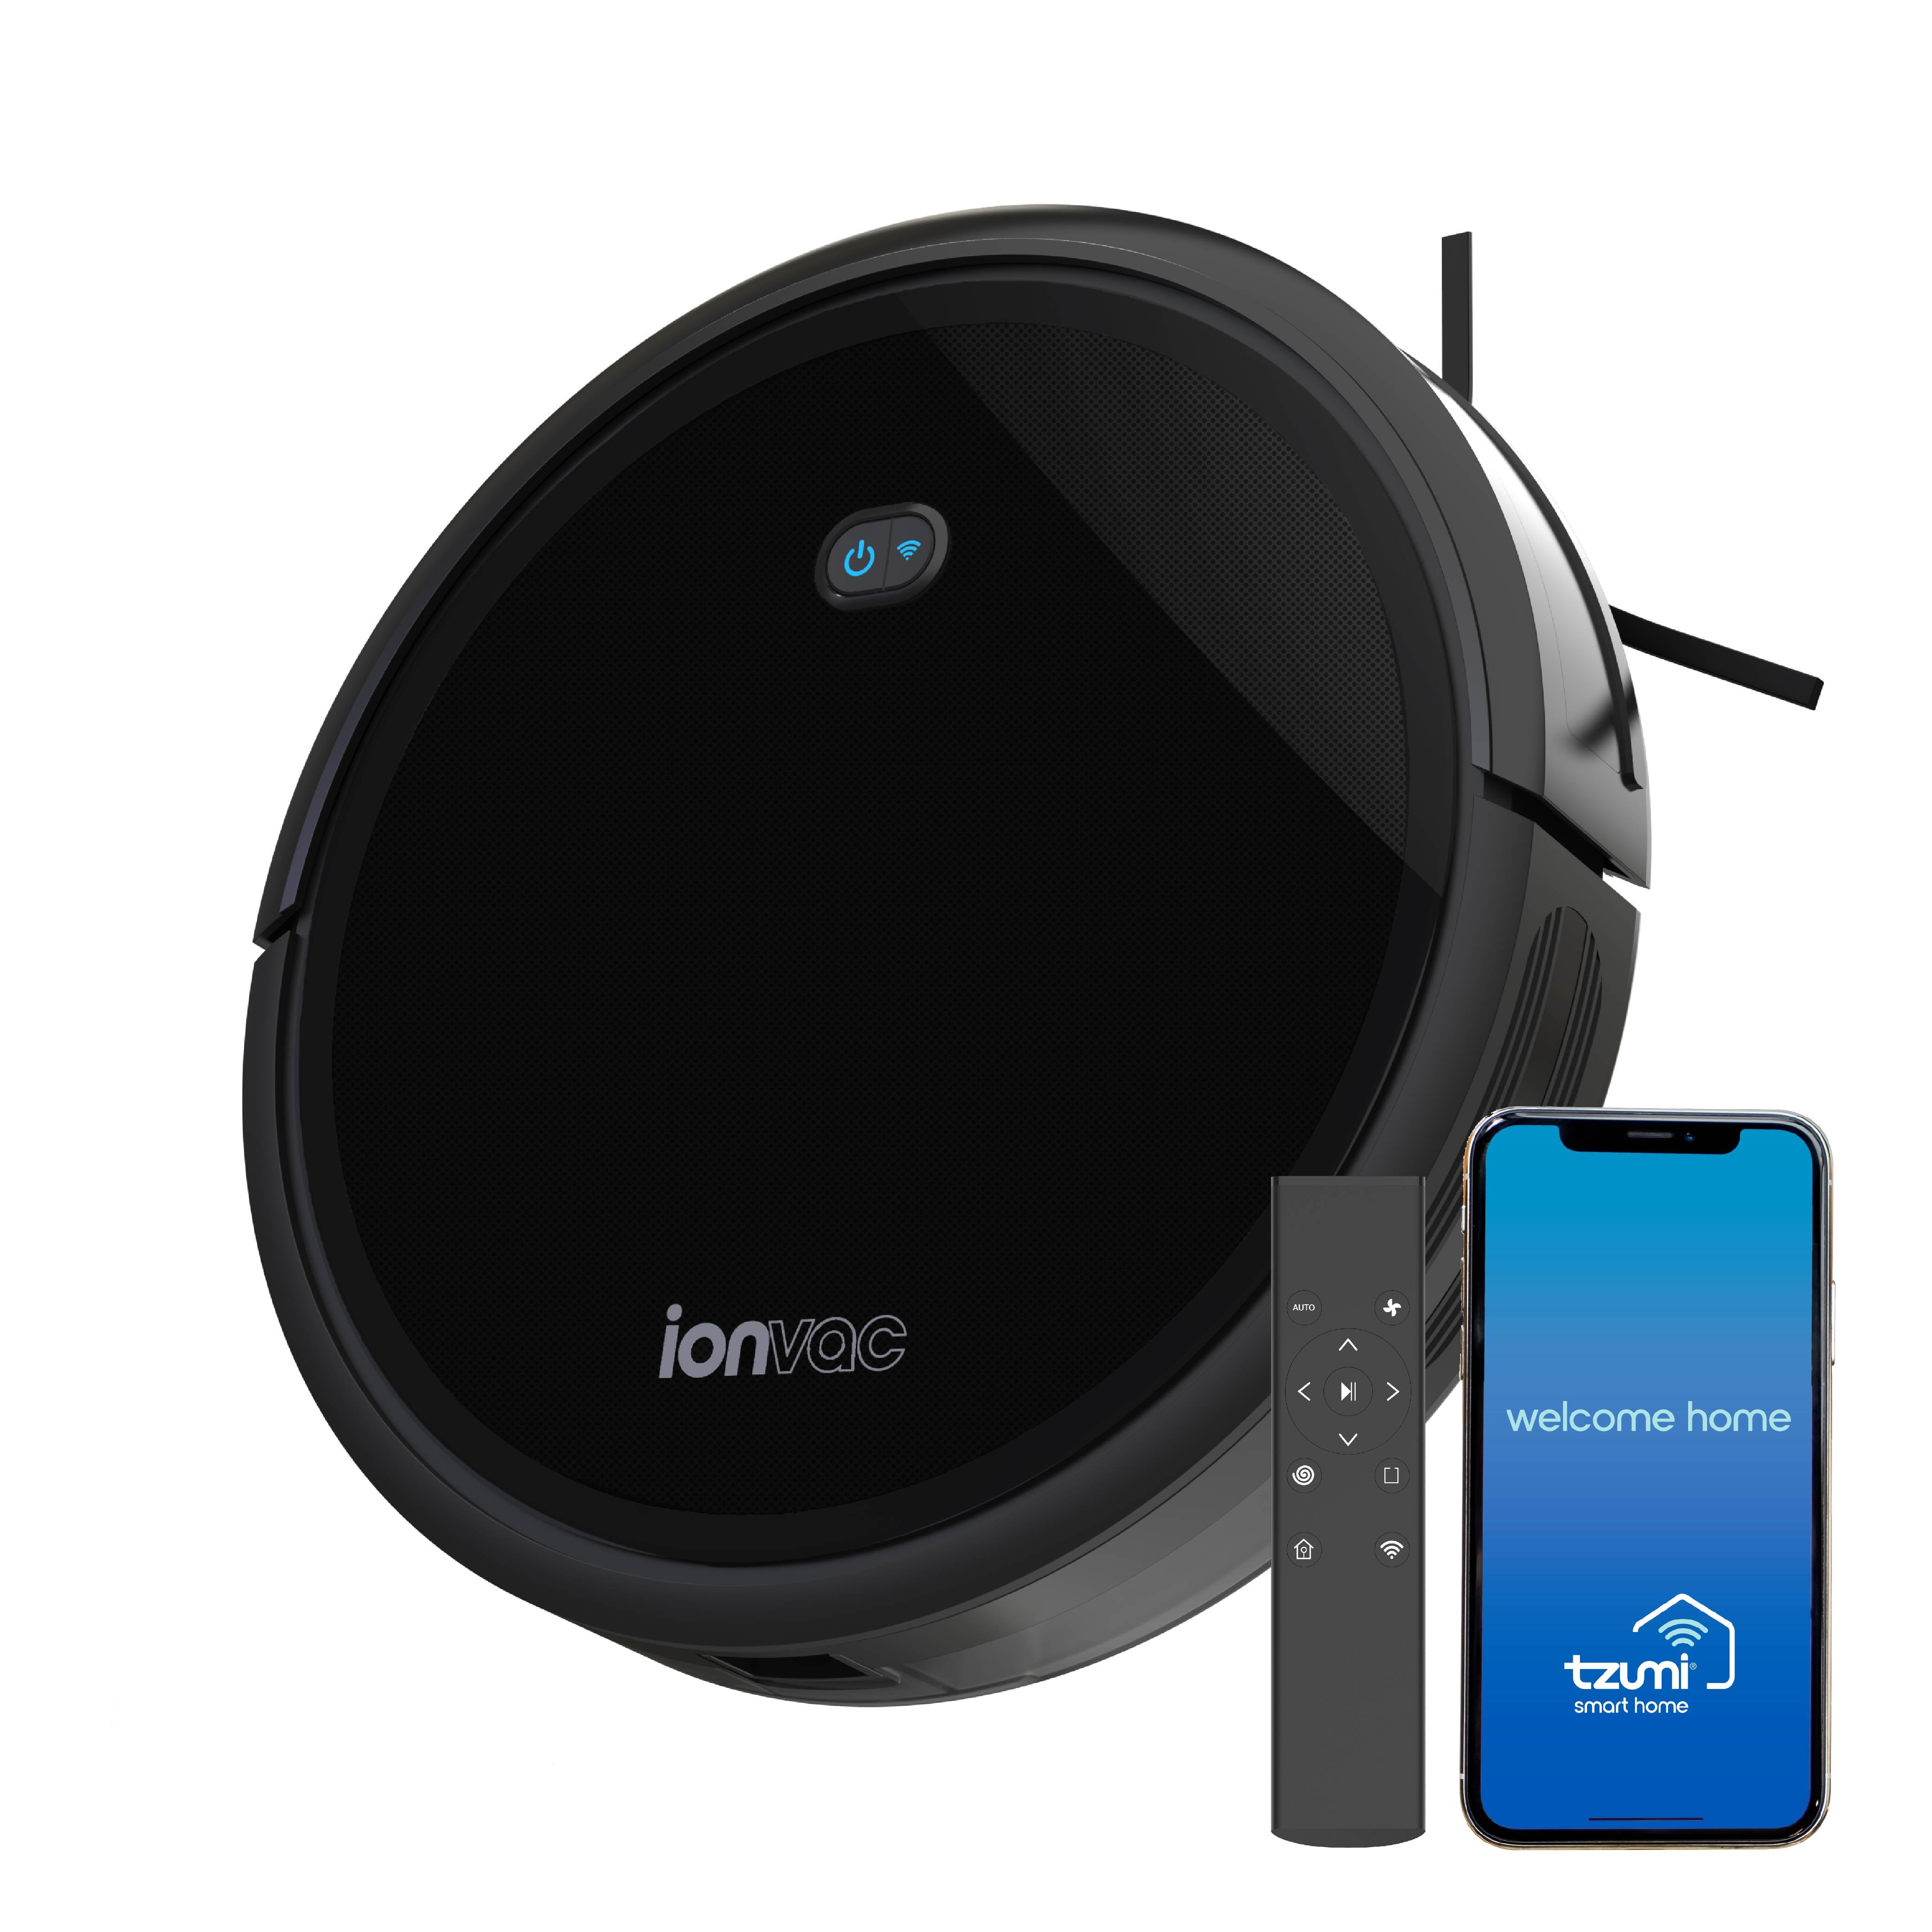 Ionvac SmartClean 2000 Robovac - WiFi Robotic Vacuum with App/Remote Control $79 + Free Shipping